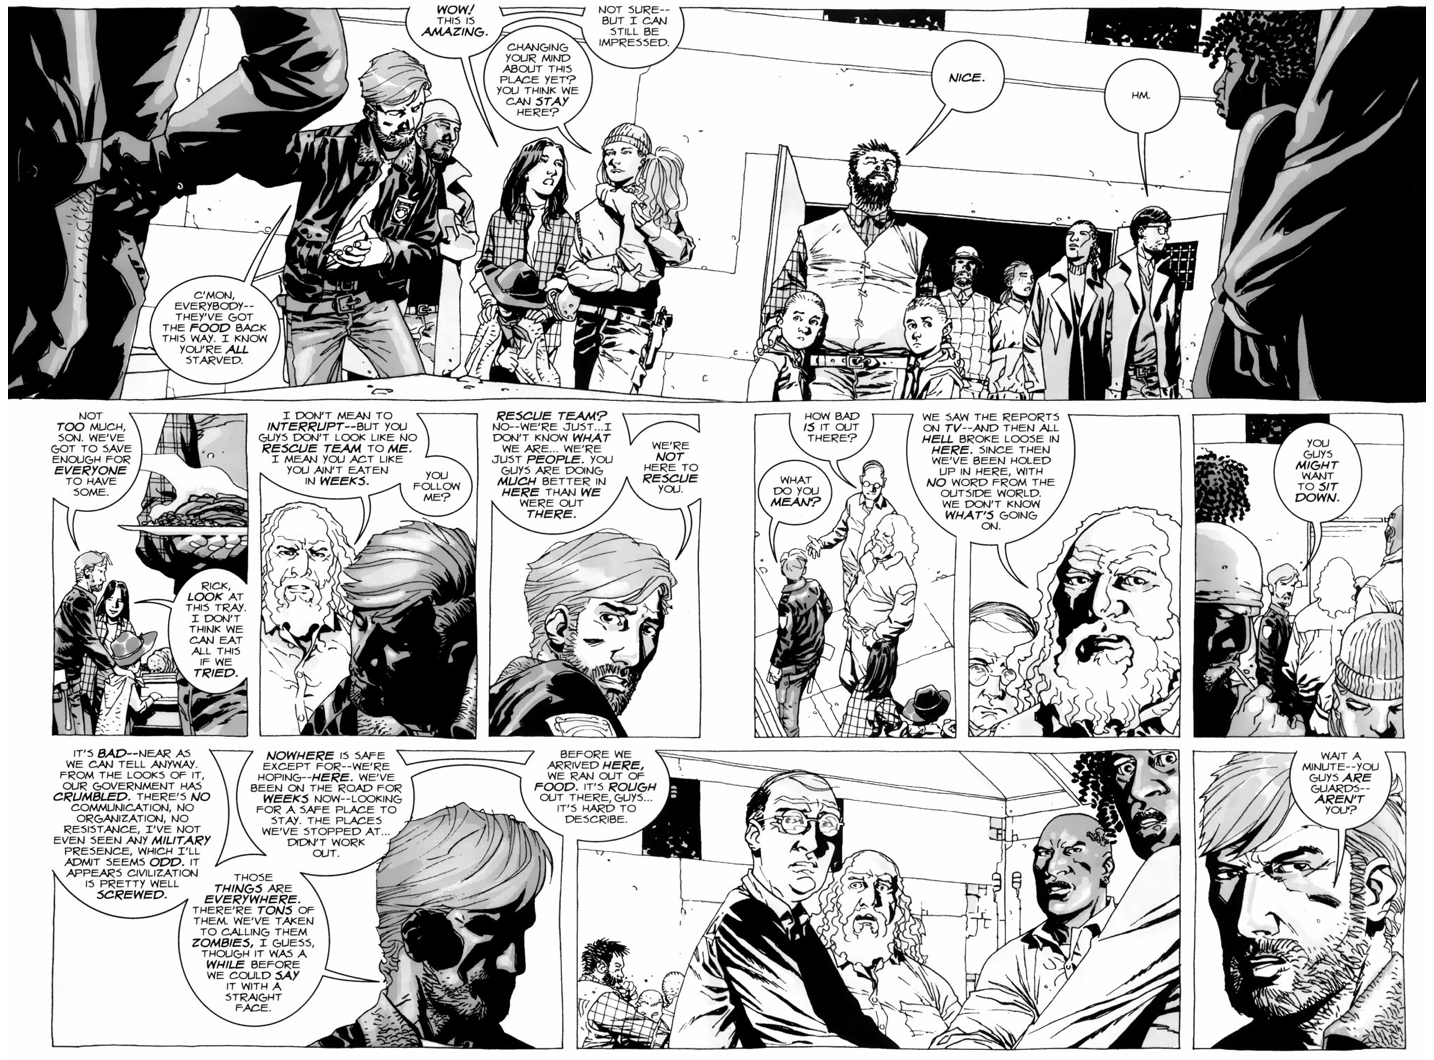 Rick Grimes's Group Meets Dexter, Axel, Thomas And Andrew (The Walking Dead)